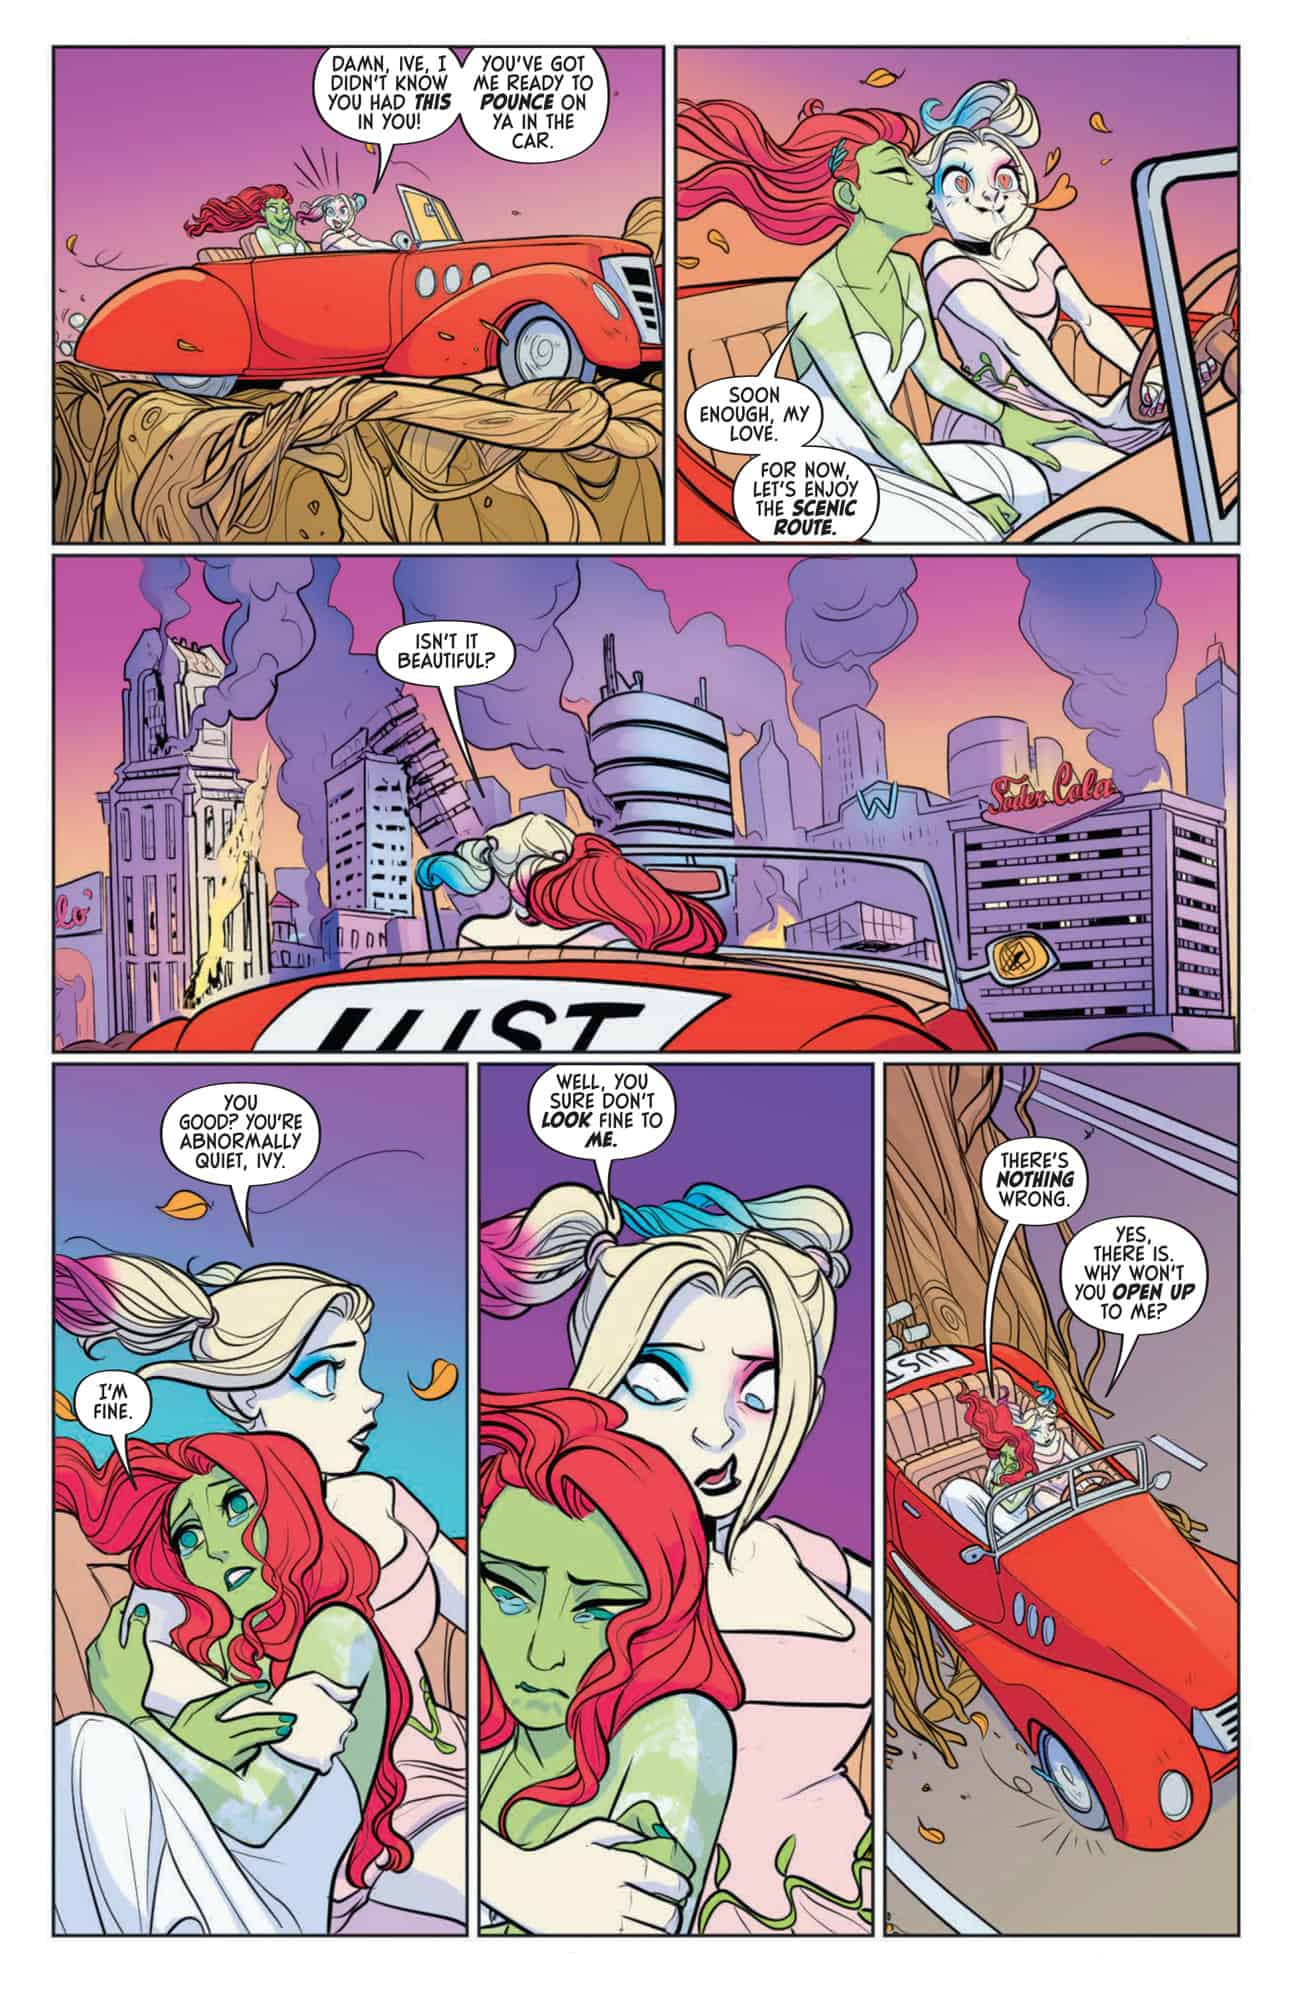 Harley Quinn and Poison Ivy speed through a destroyed Gotham in a red car. Ivy, who has green skin and red hair, is wearing a wedding dress. She is sitting next to Harley, who has white skin and blonde hair and is wearing a pink dress. At first, both seem to be having fun, and Ivy slides her hand up Harley's skirt. However, she then curls up, leaning against Harley and looking sad. Harley tries to discern why Ivy is so upset.